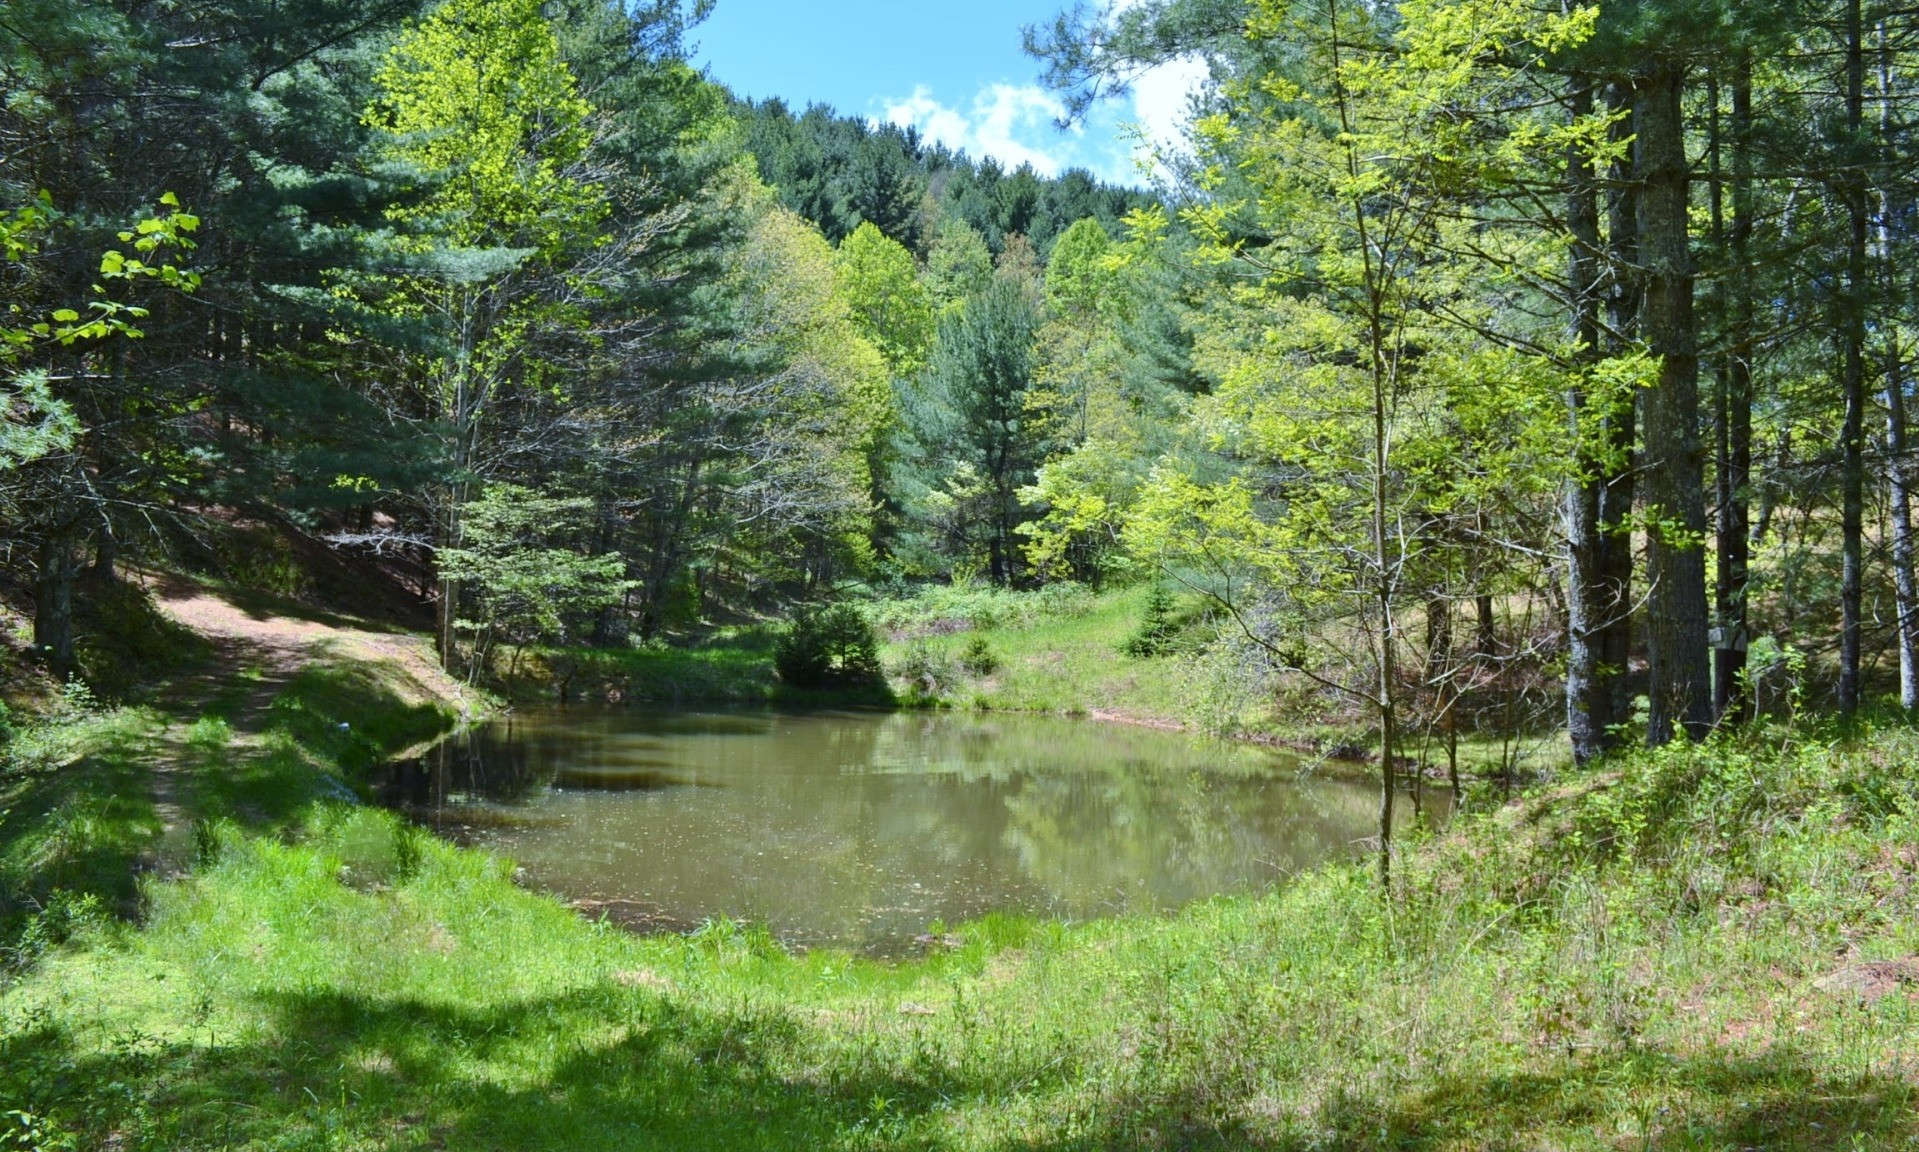 A SPORTSMAN'S PARADISE! This 45.94 acre tract offers complete privacy with a hunting cabin and spring fed pond.